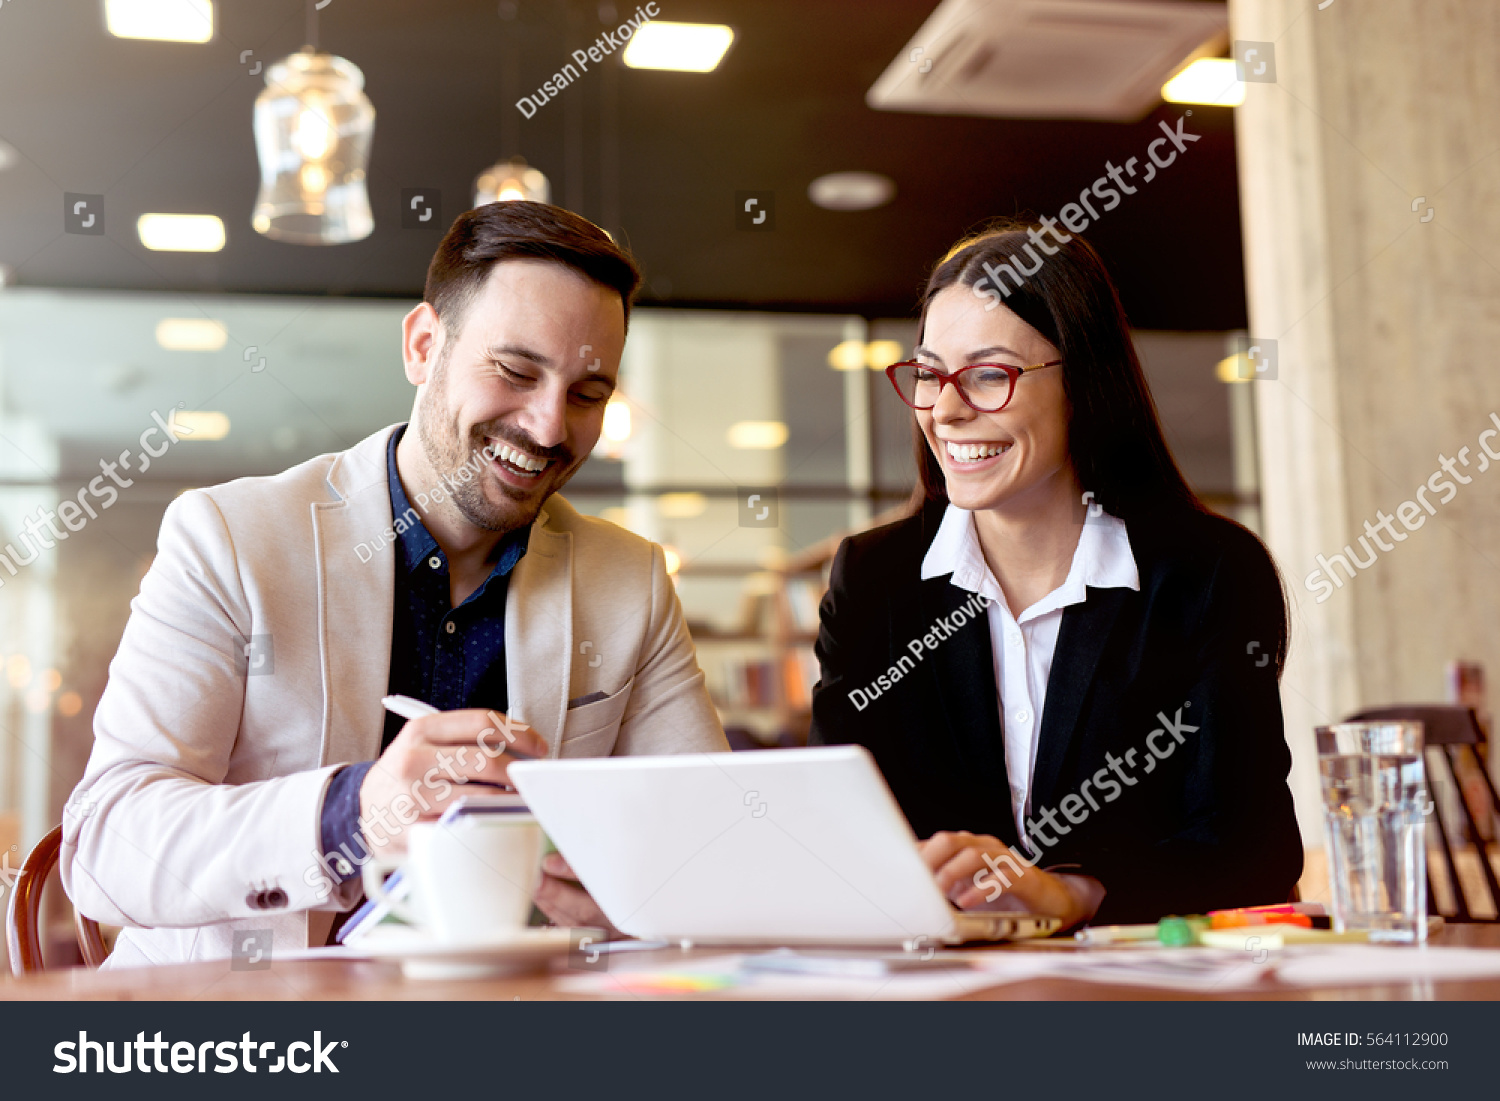 Two young businessman having a successful meeting at restaurant. #564112900